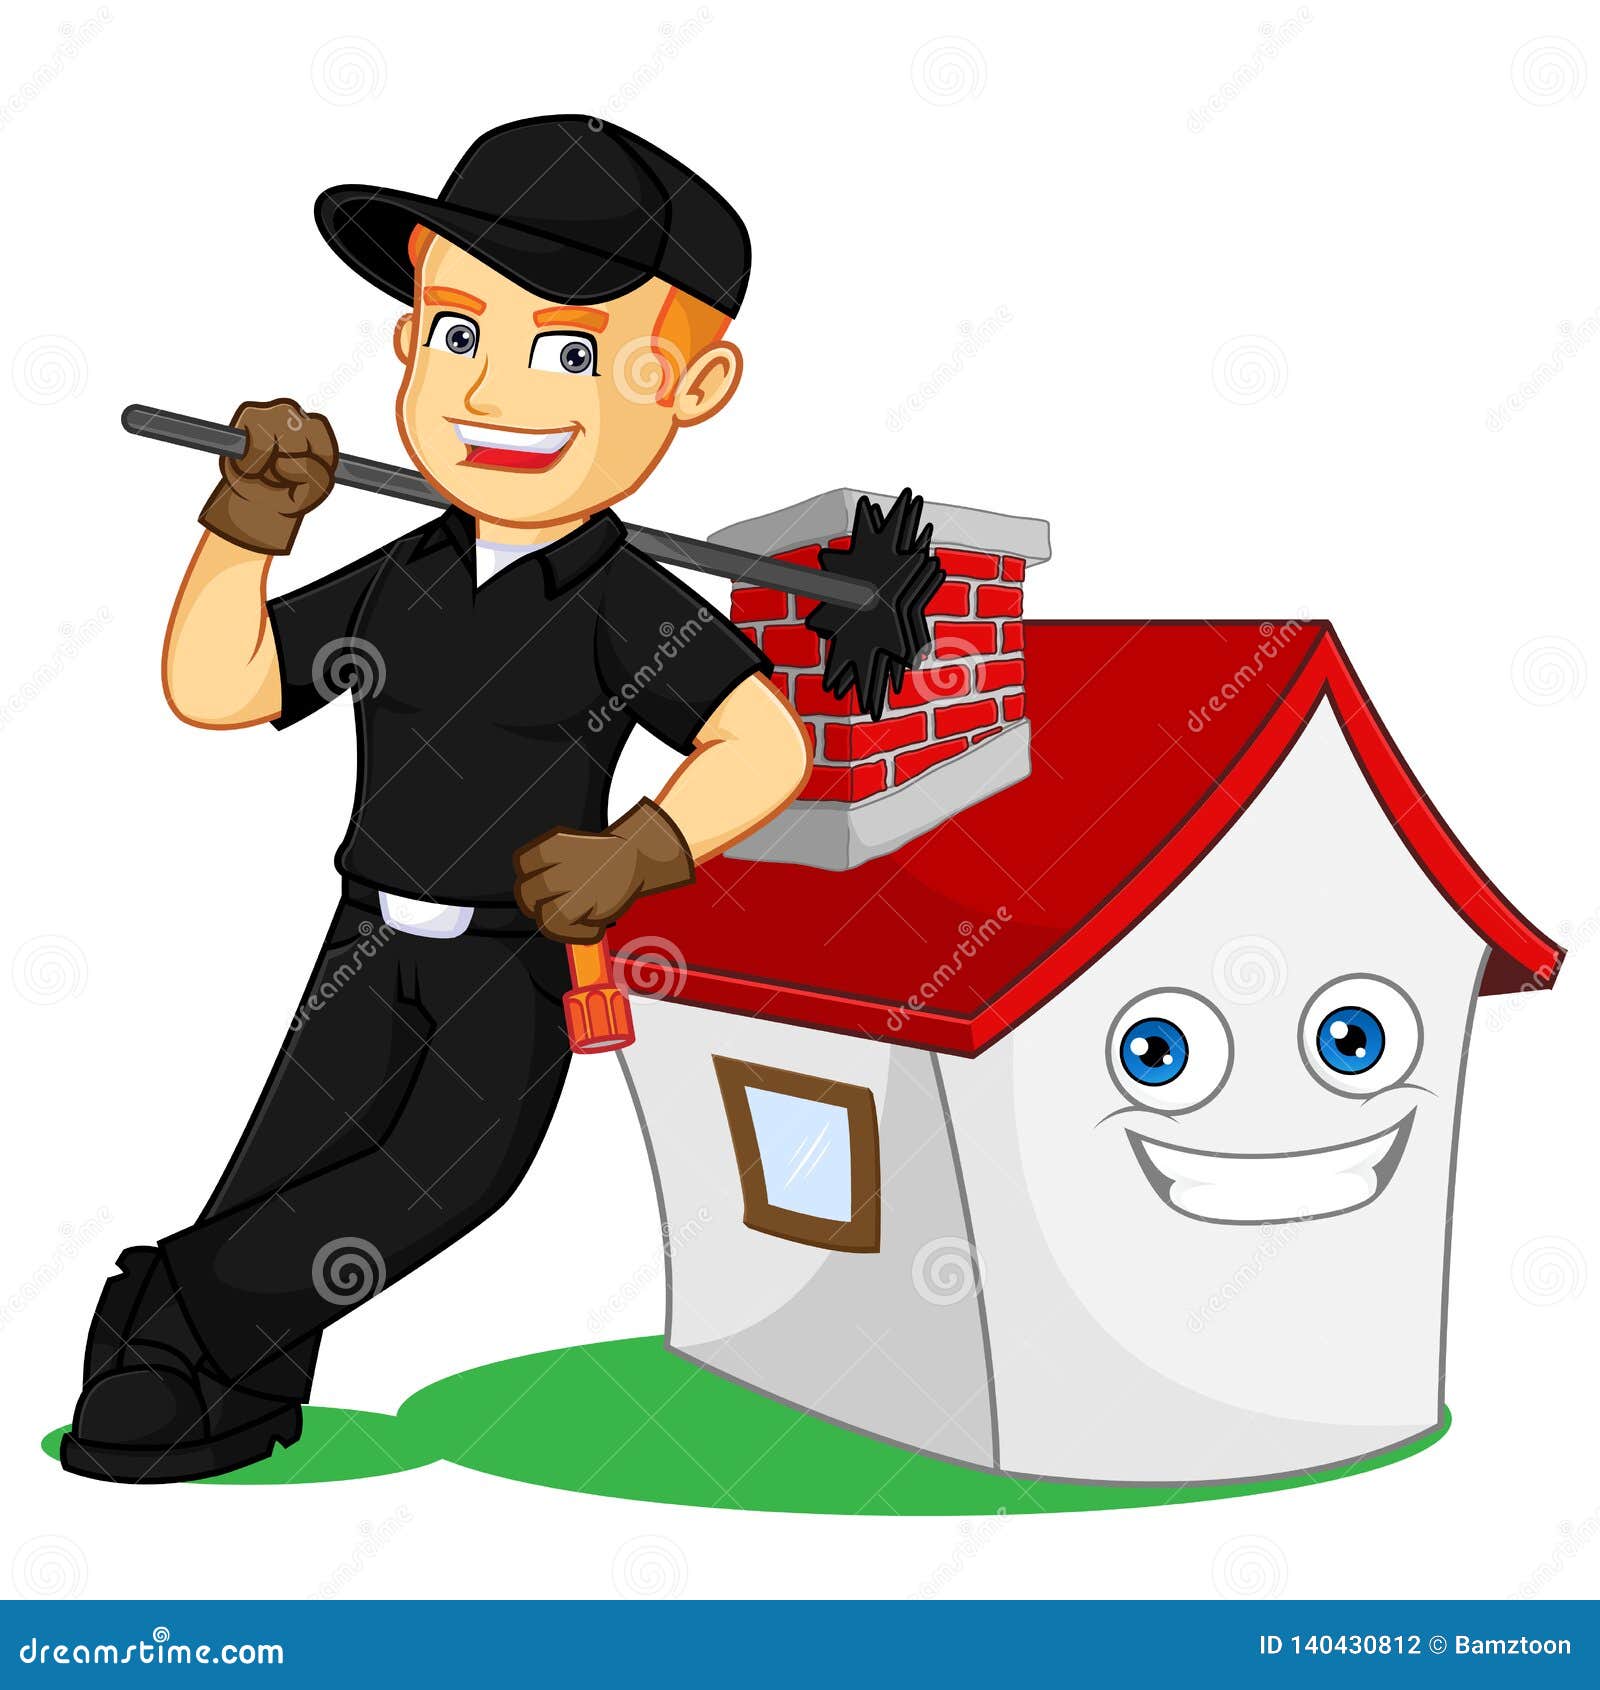 chimney sweeper leaning on a house